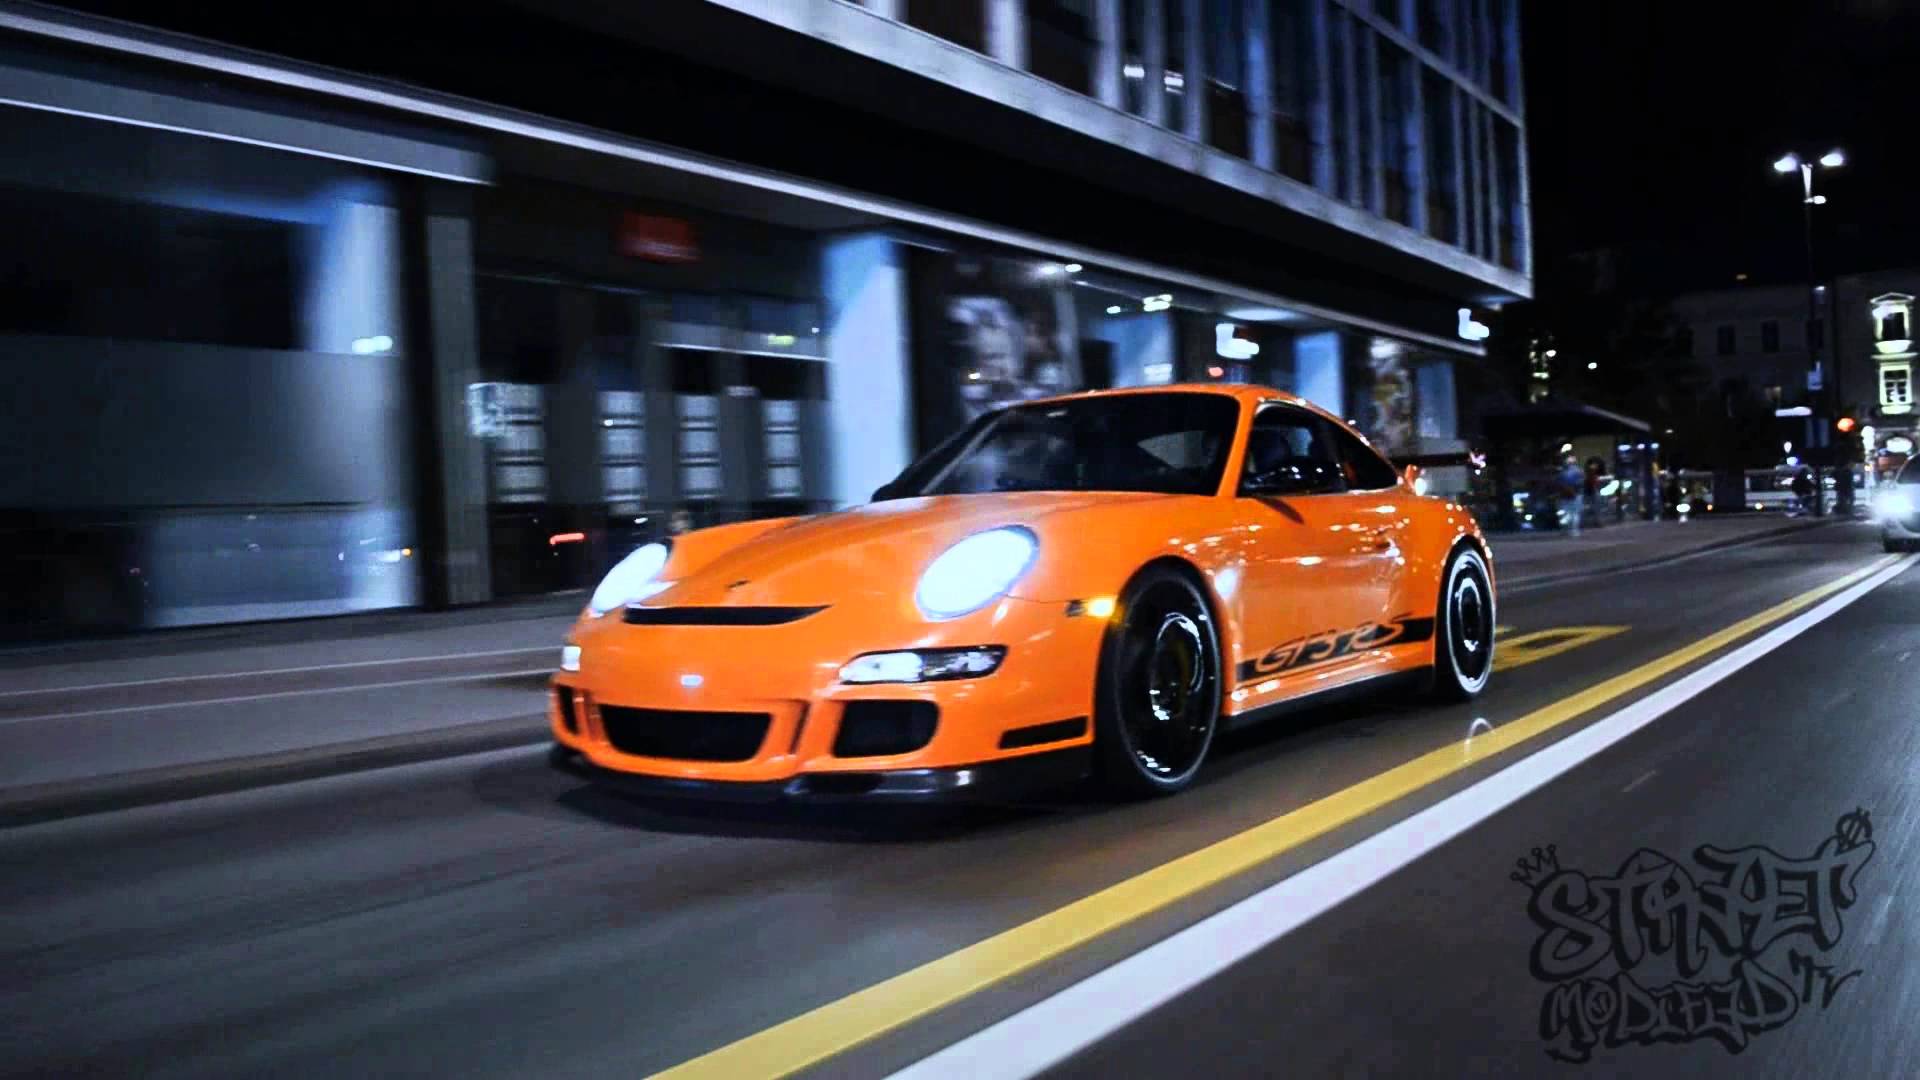 Porsche GT3 RS Date With The Orange Beast